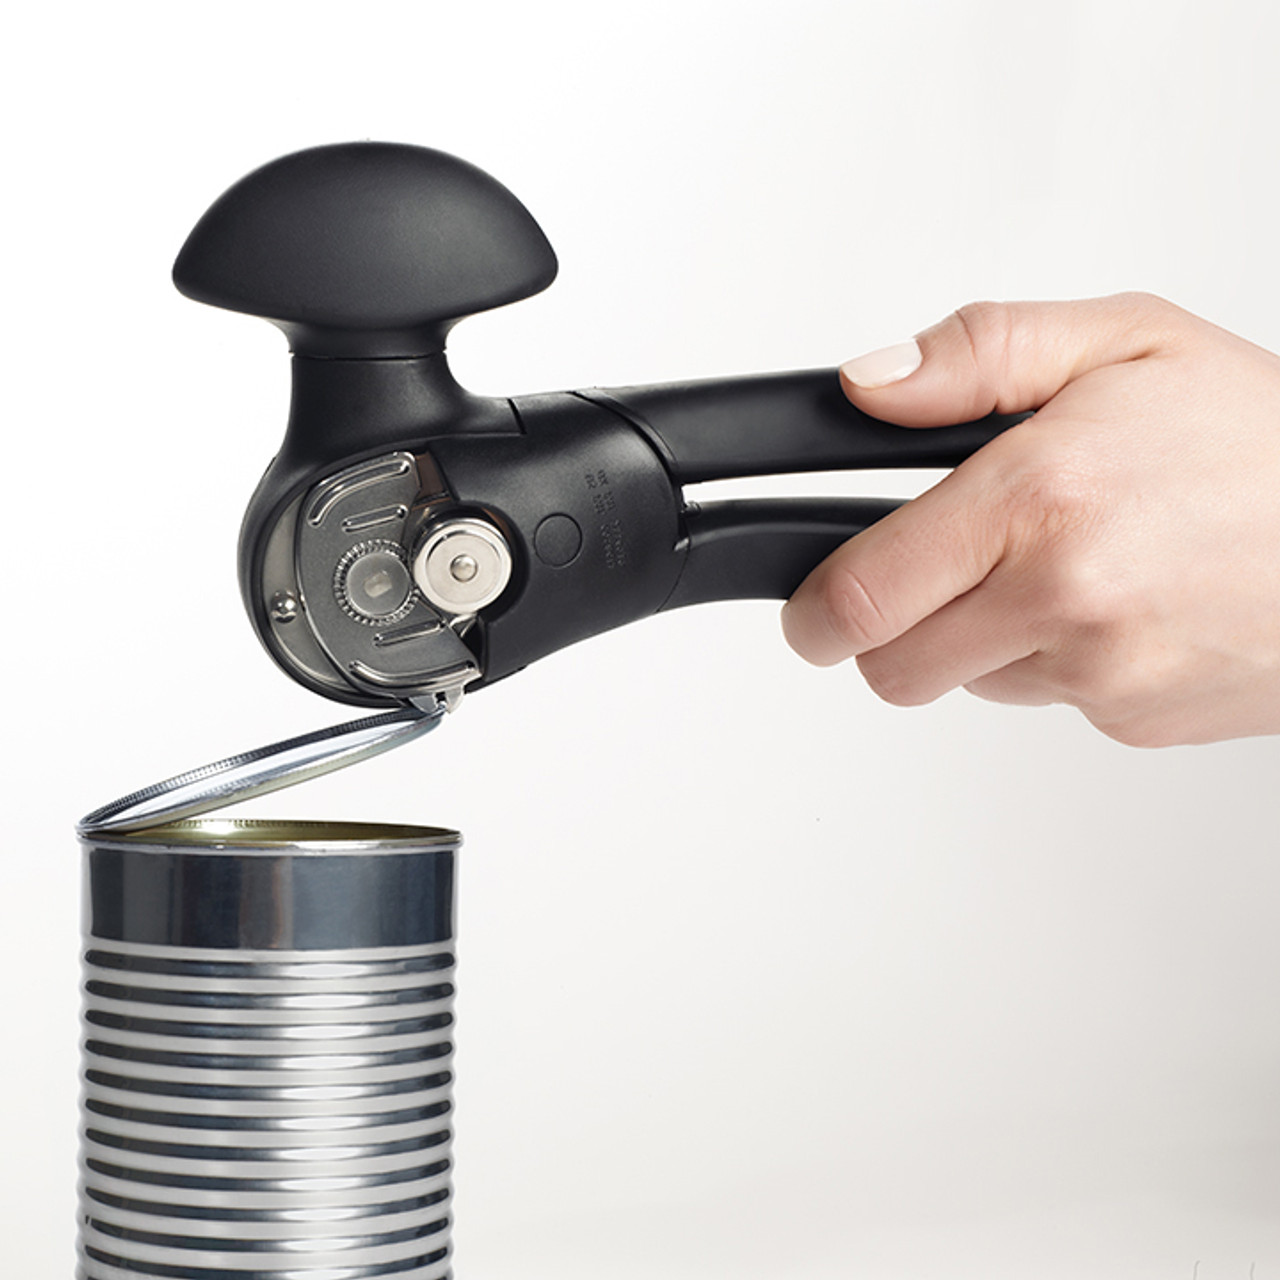 Smooth Edge Safe Cut Can Opener - No Sharp Edges or Cuts 